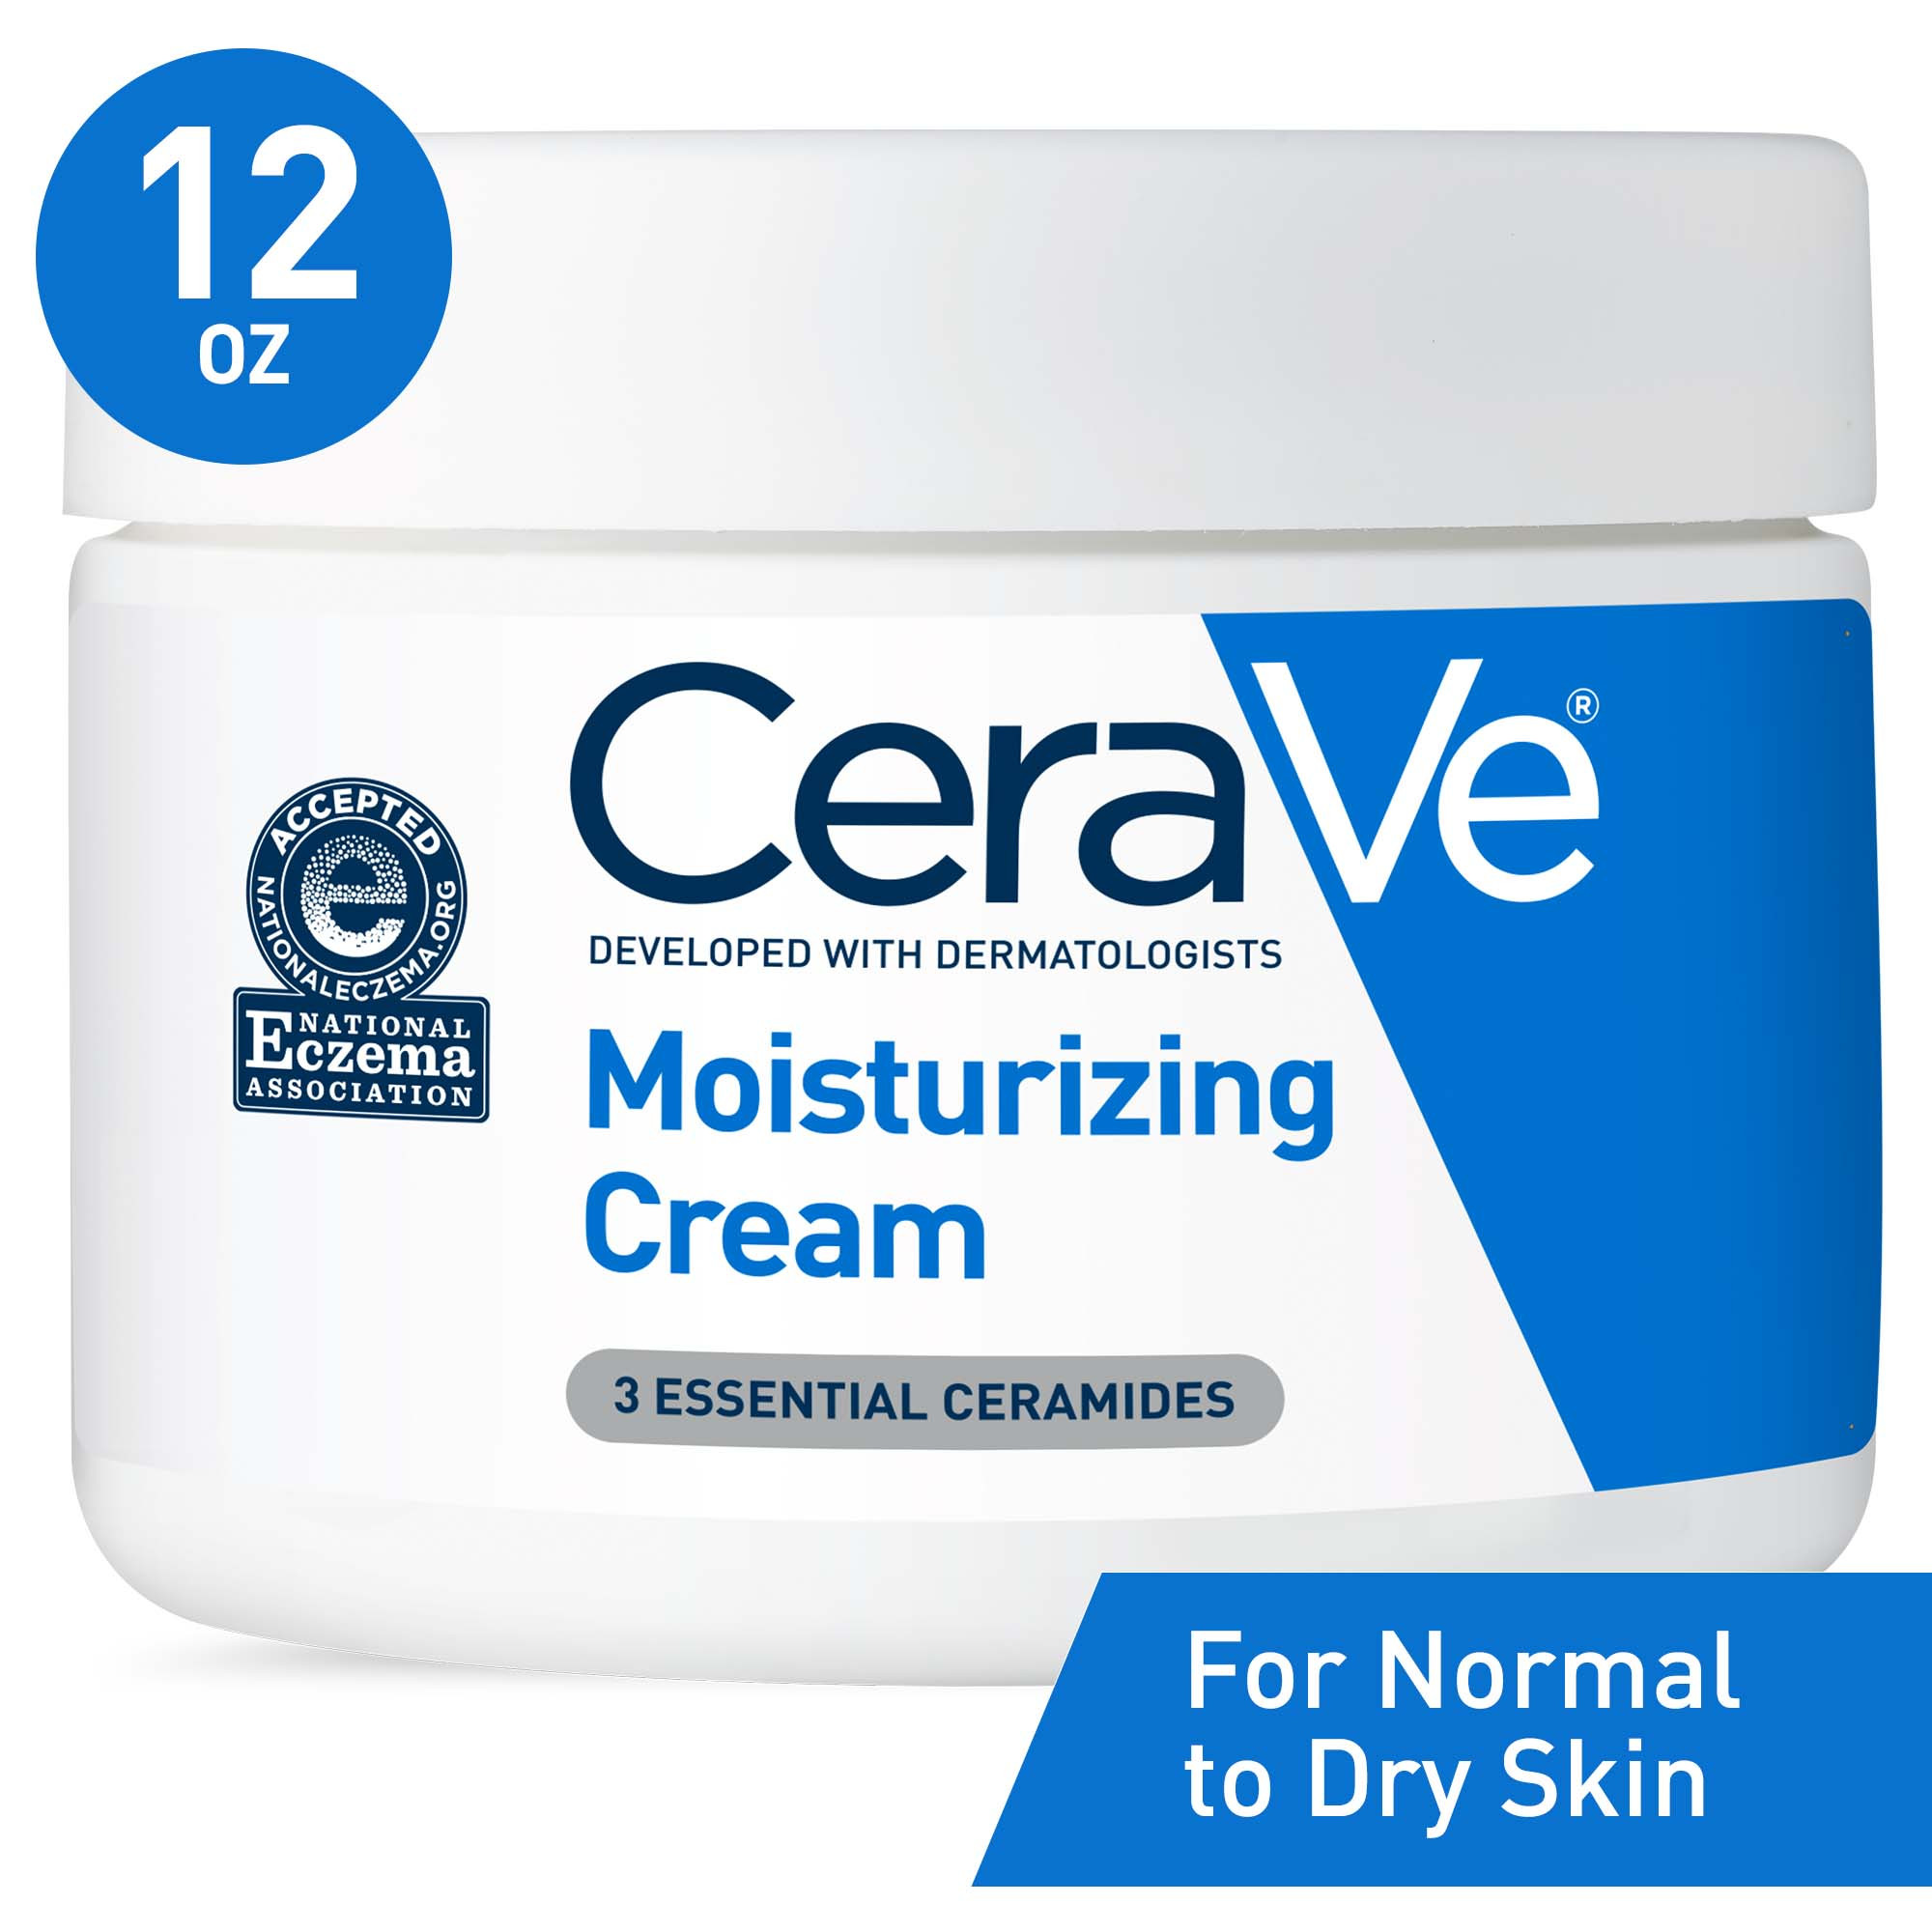 CeraVe Moisturizing Cream, Face Moisturizer & Body Lotion for Normal to Very Dry Skin, 12 oz - image 1 of 14